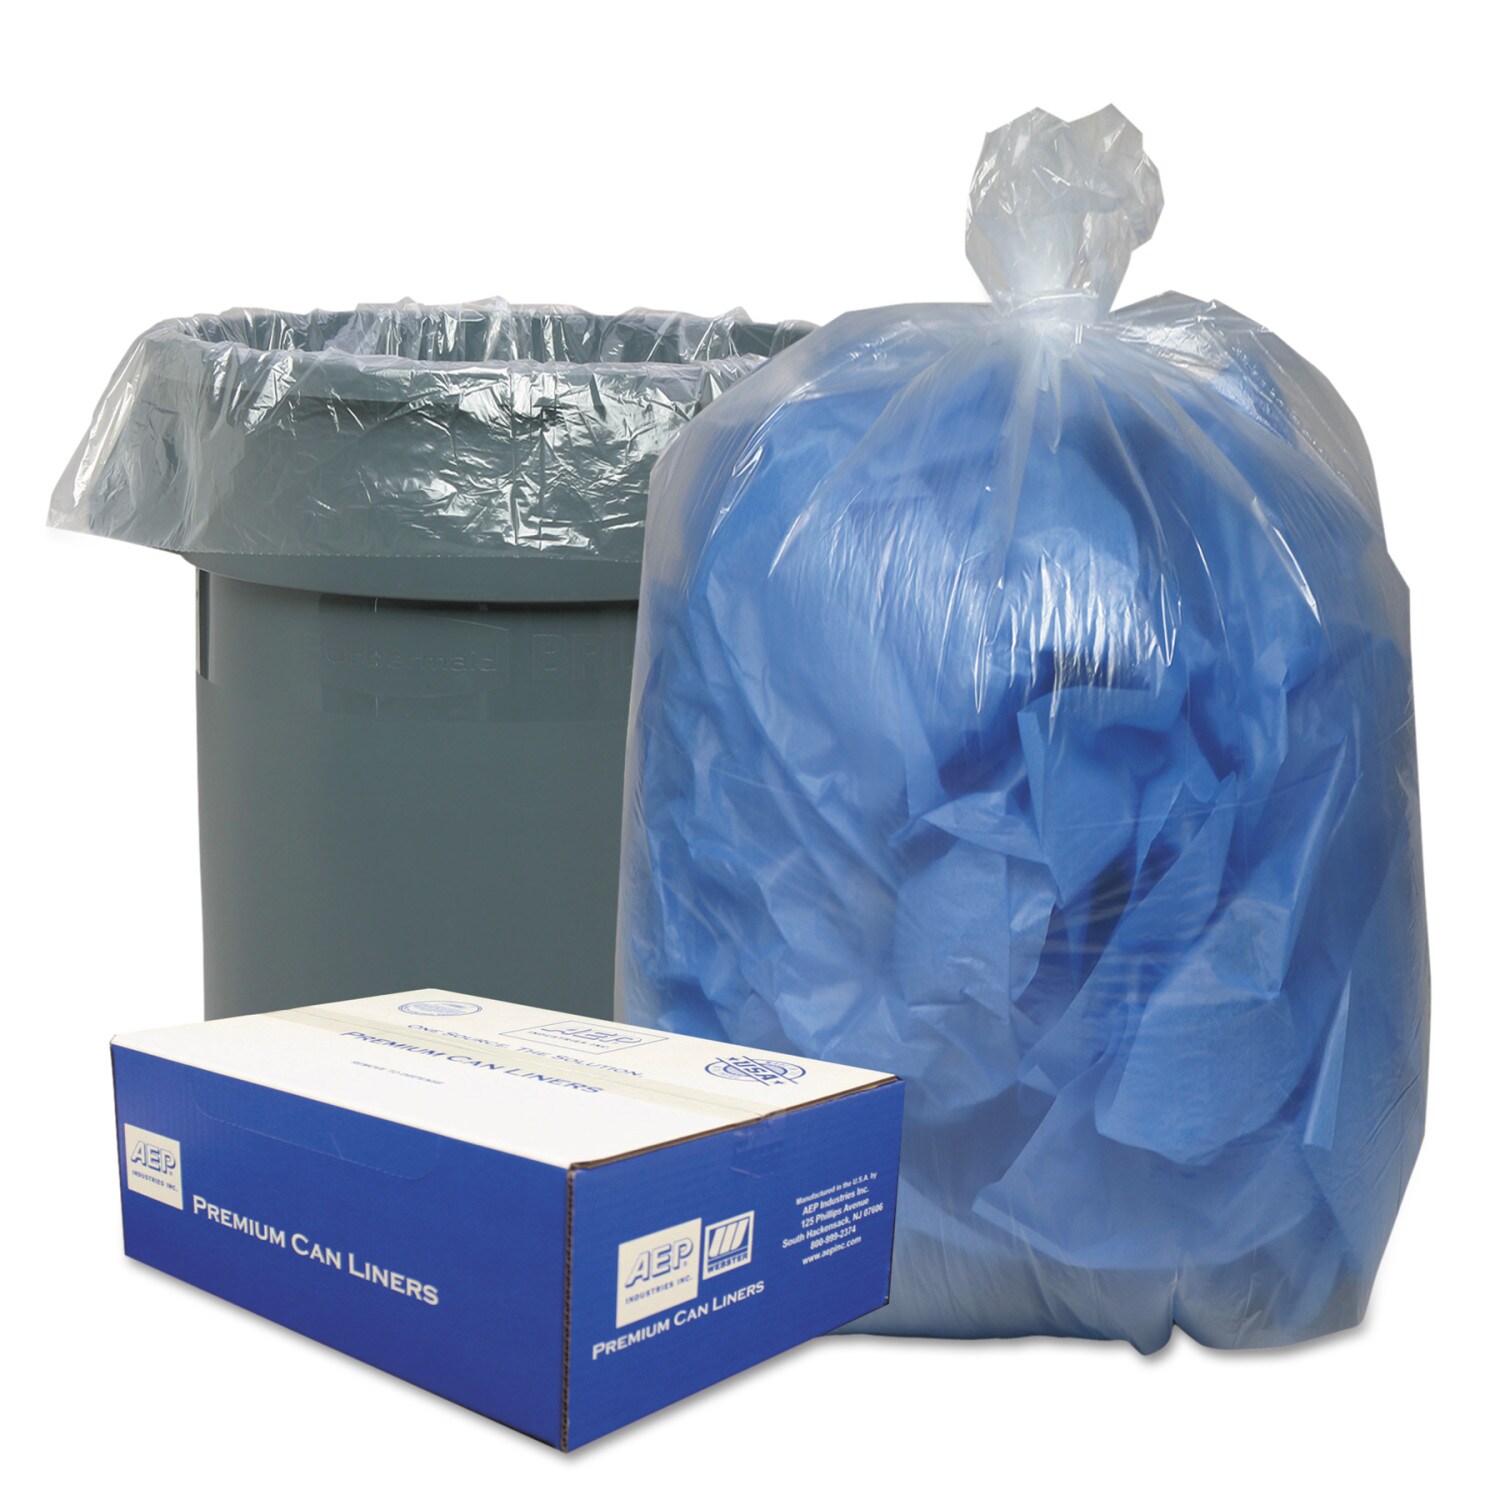 Great Value 4 Gallon Eucalyptus Mint Scent Small Trash Bags, 36 Pack 